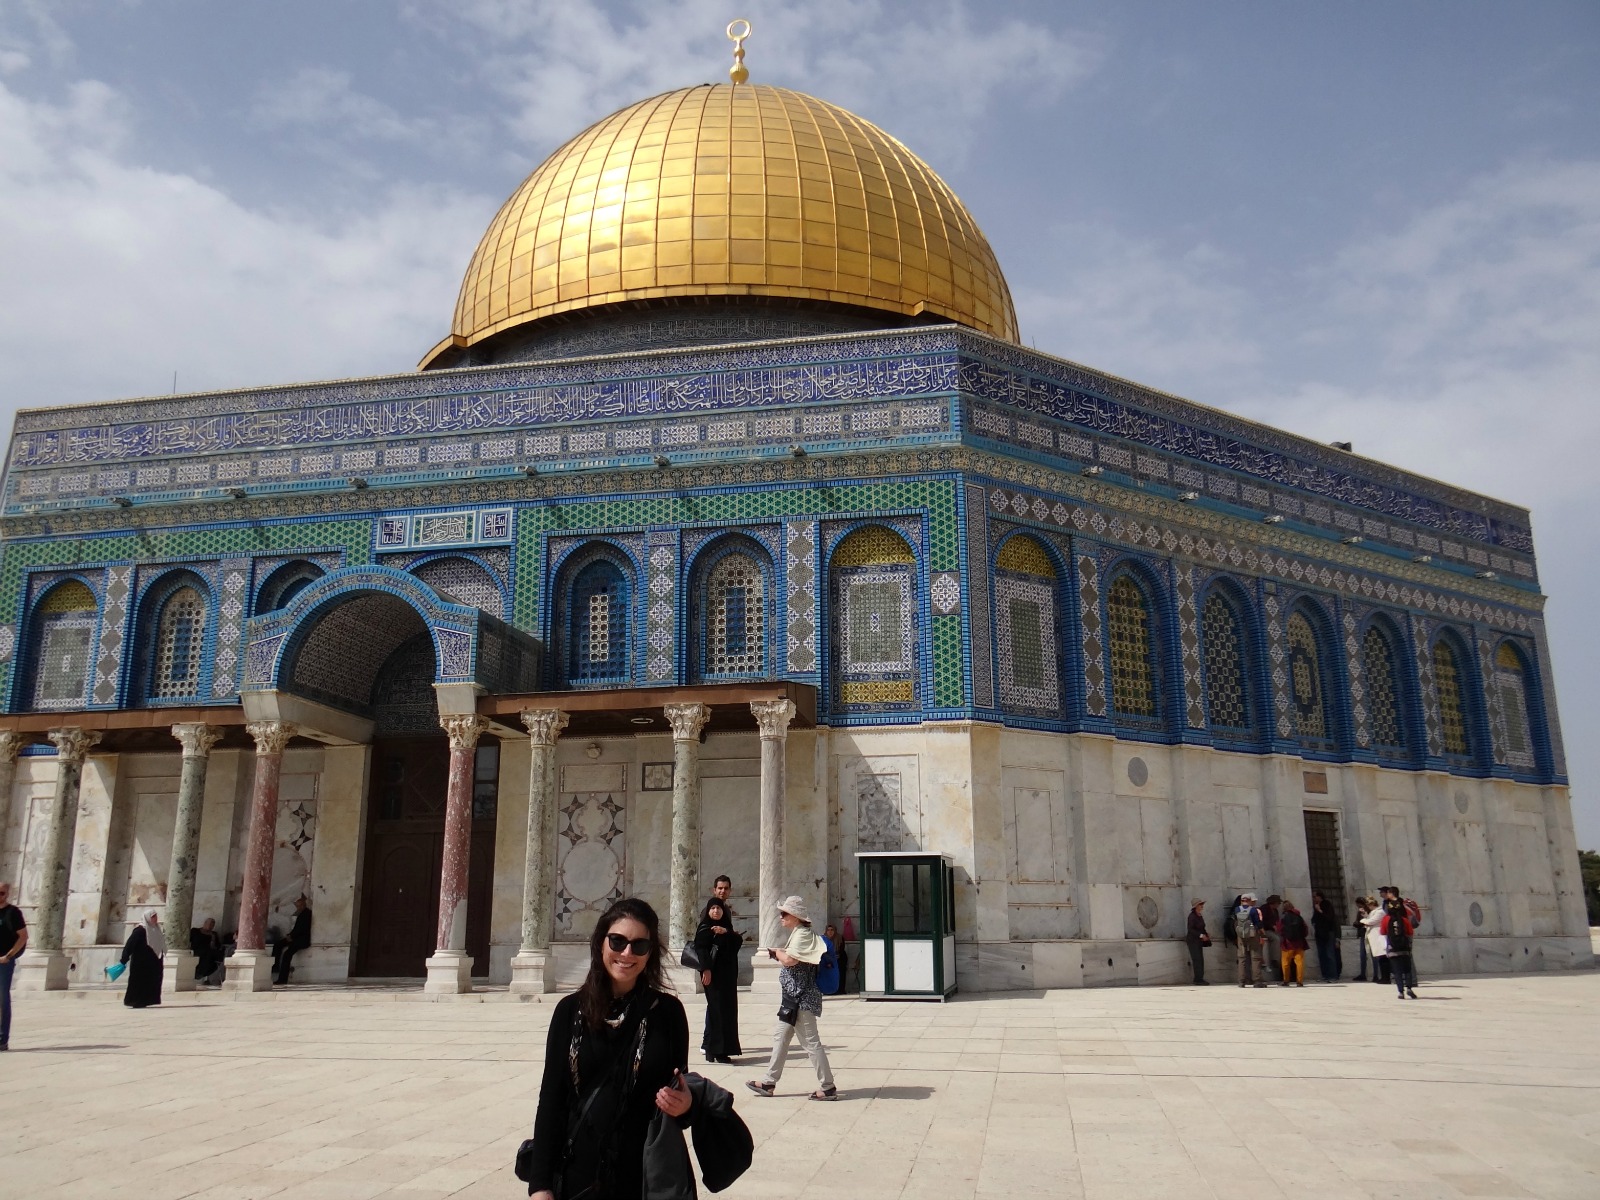 Me at temple mount | Romantic Journeys Near and Far